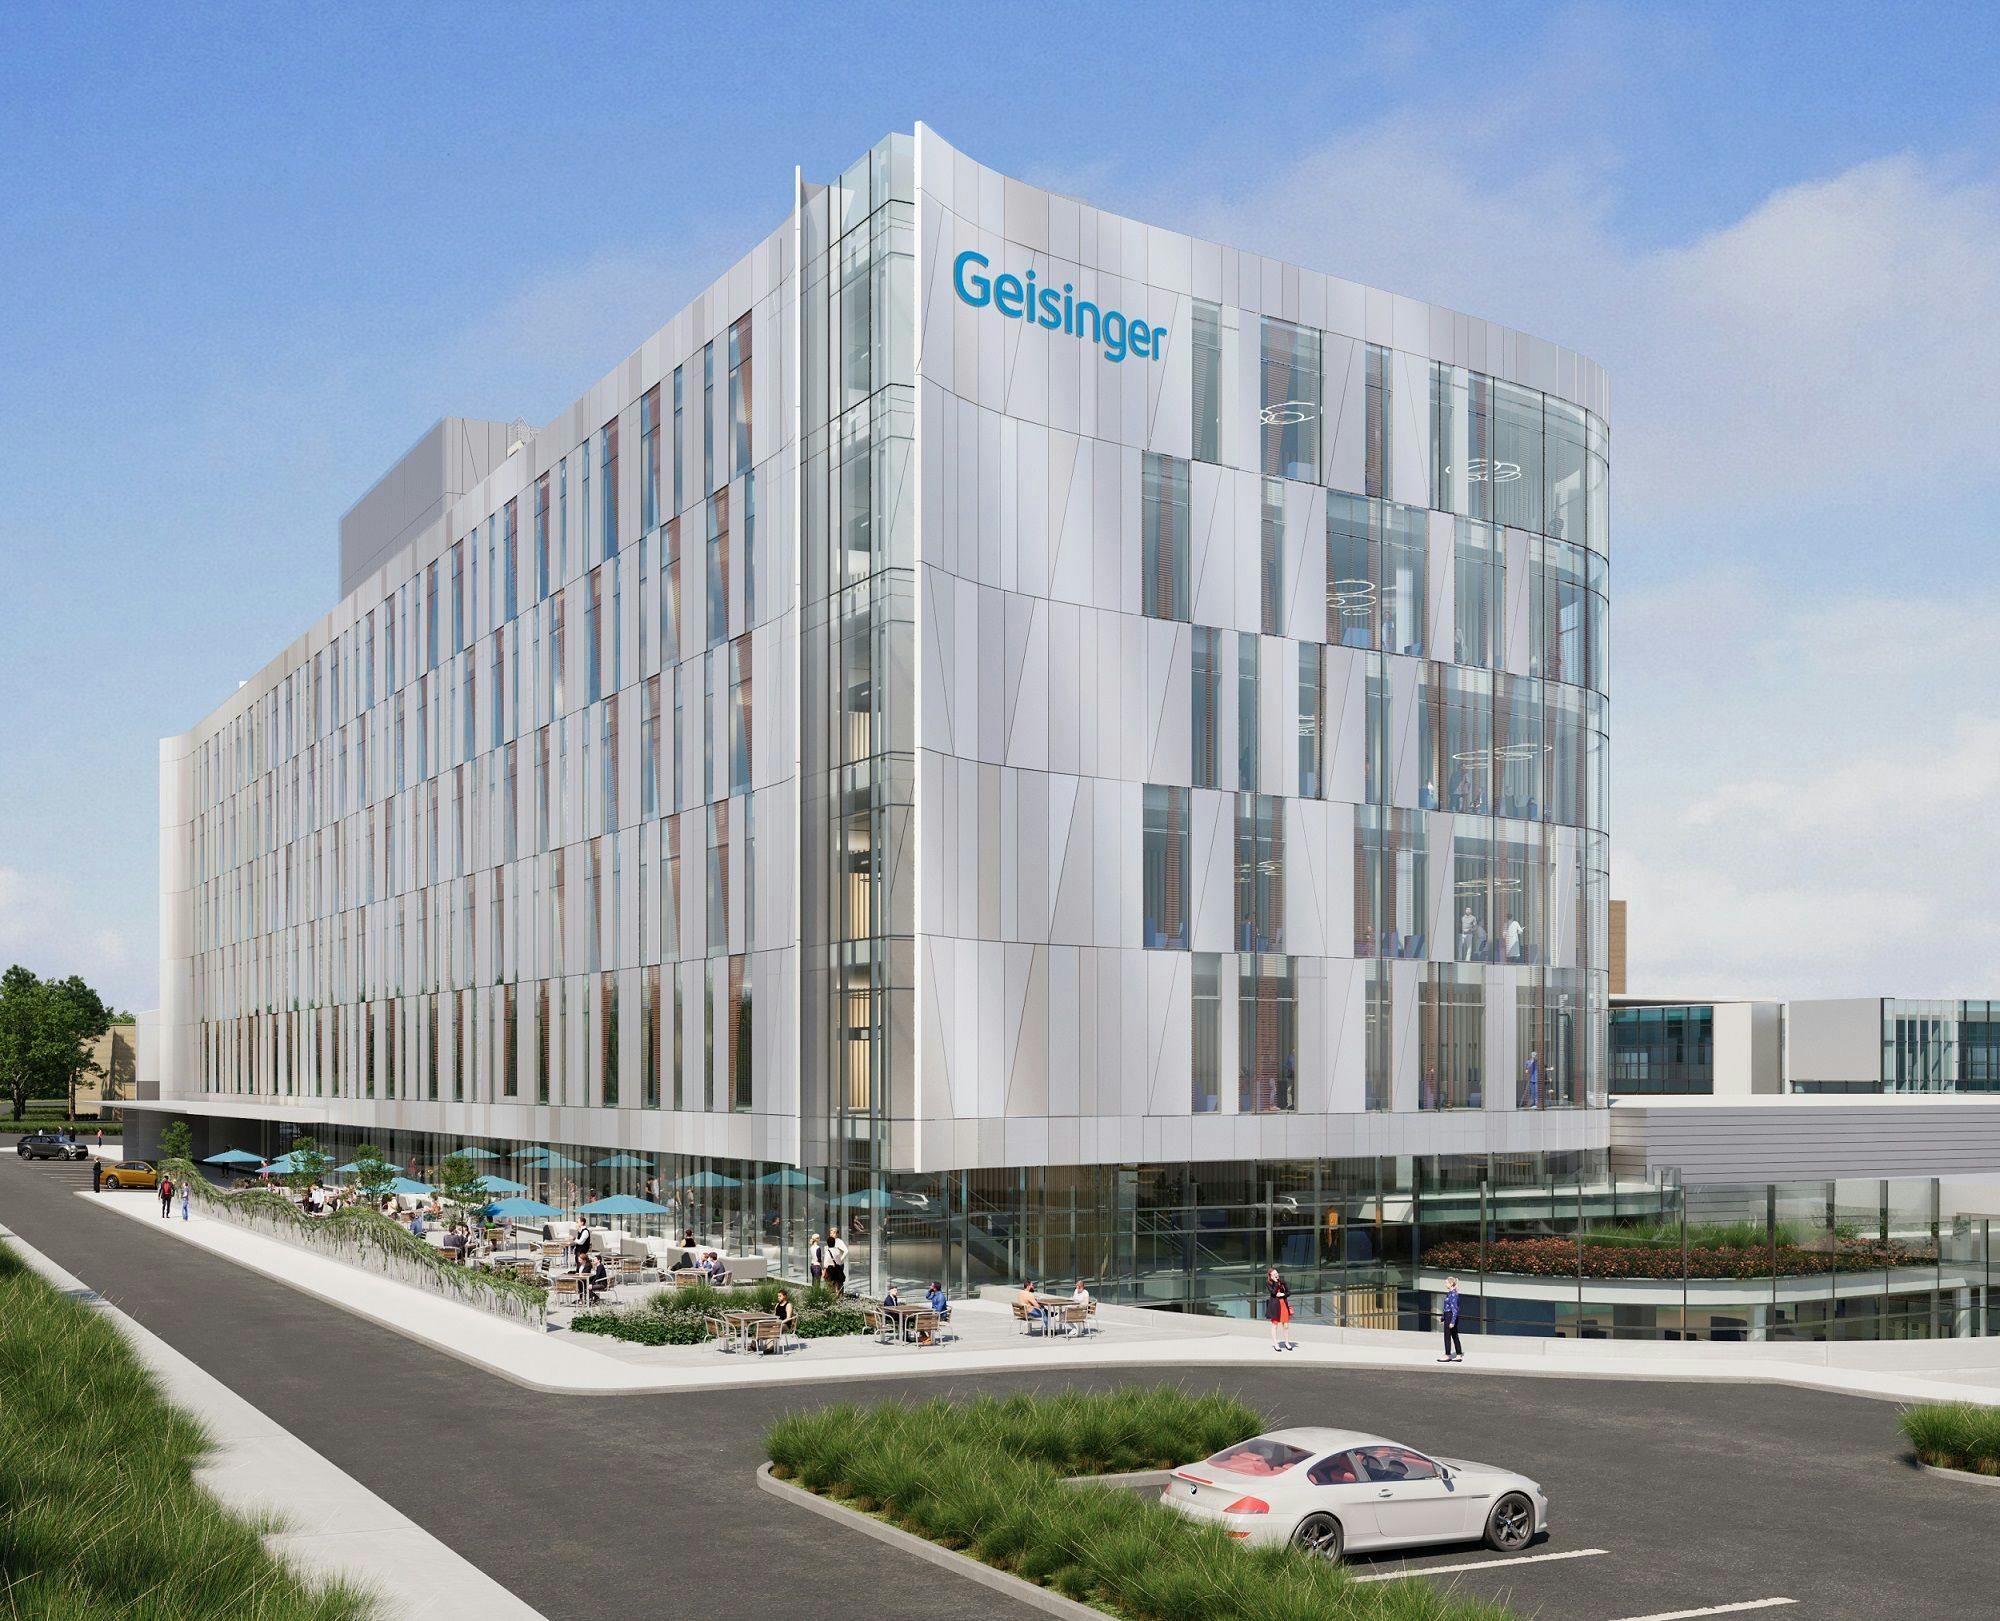 Geisinger investing $1.8B in major hospital projects